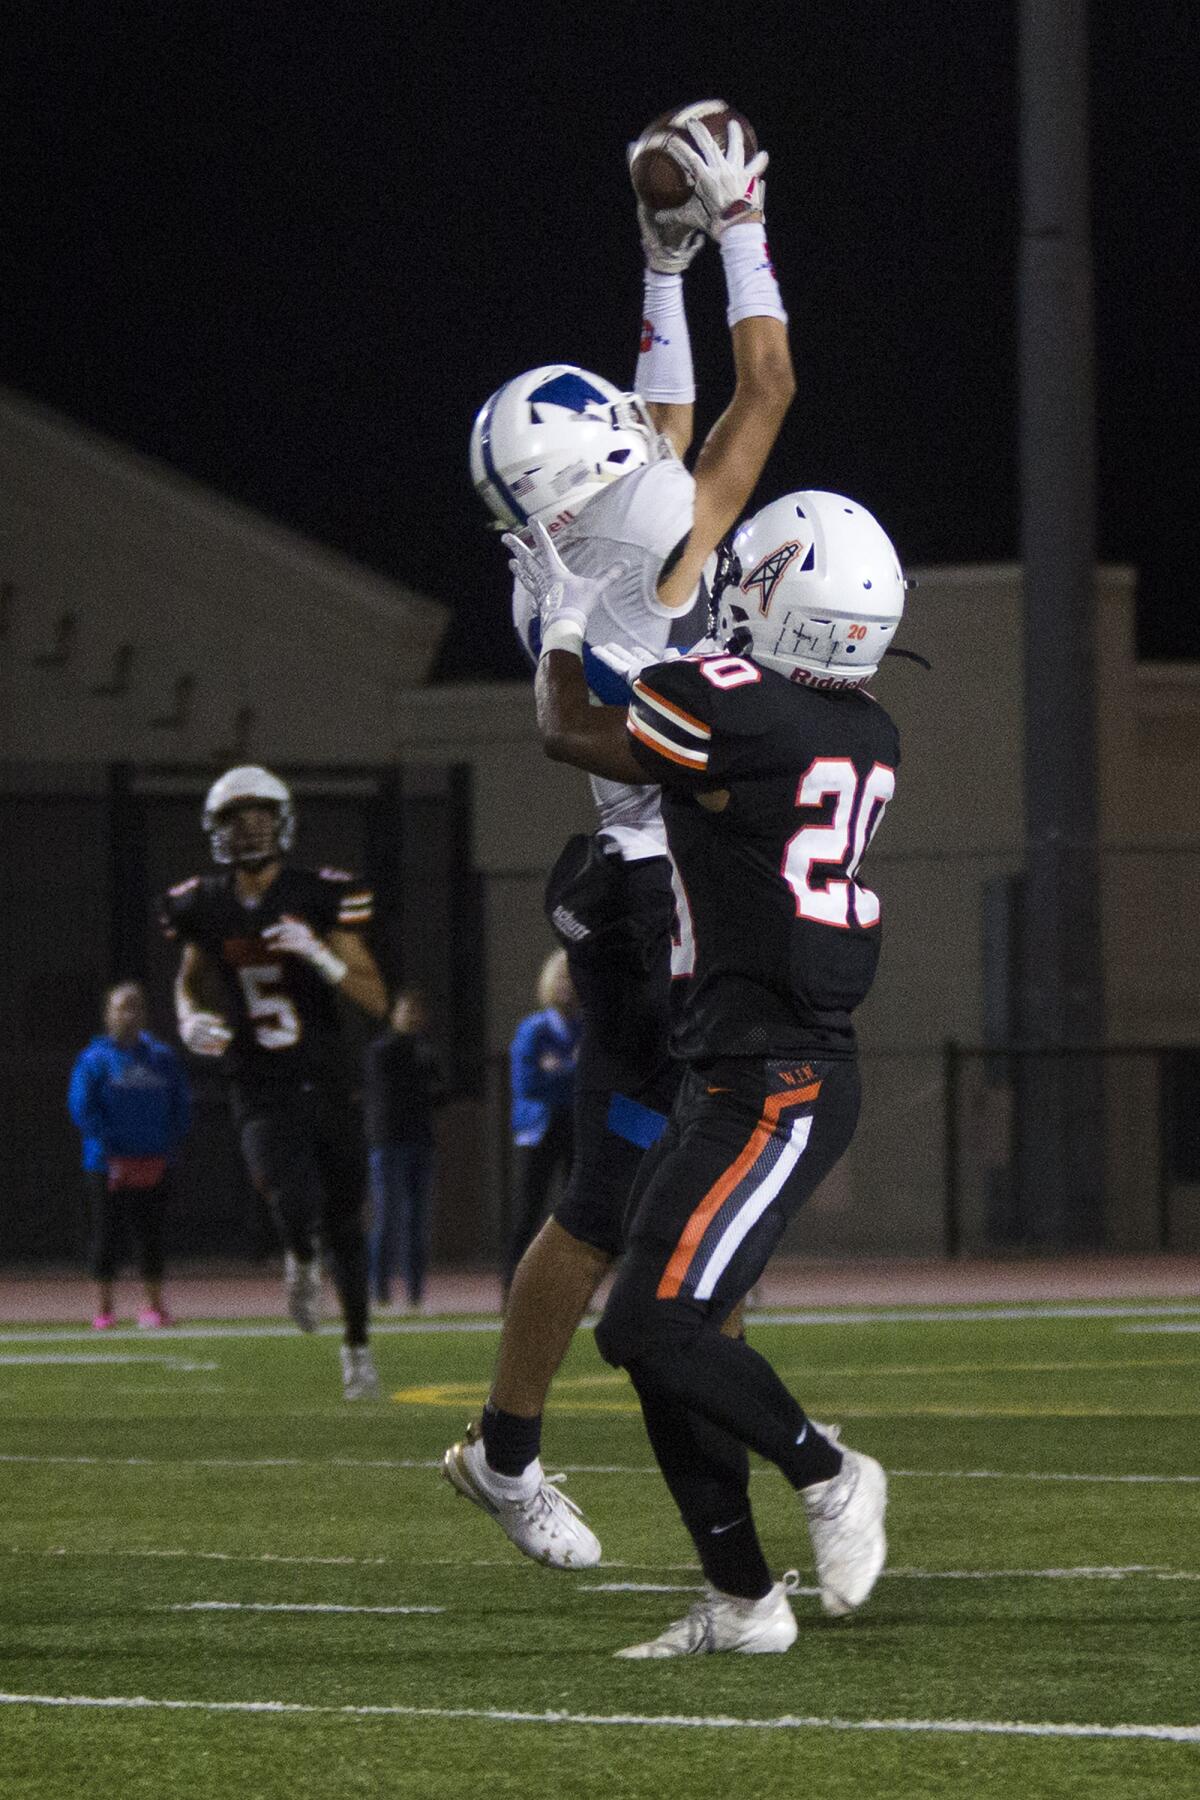 Western's Anthony Barbosa intercepts a pass intended for Huntington Beach's Hideo Ray in a nonleague game at Cap Sheue Field on Friday.